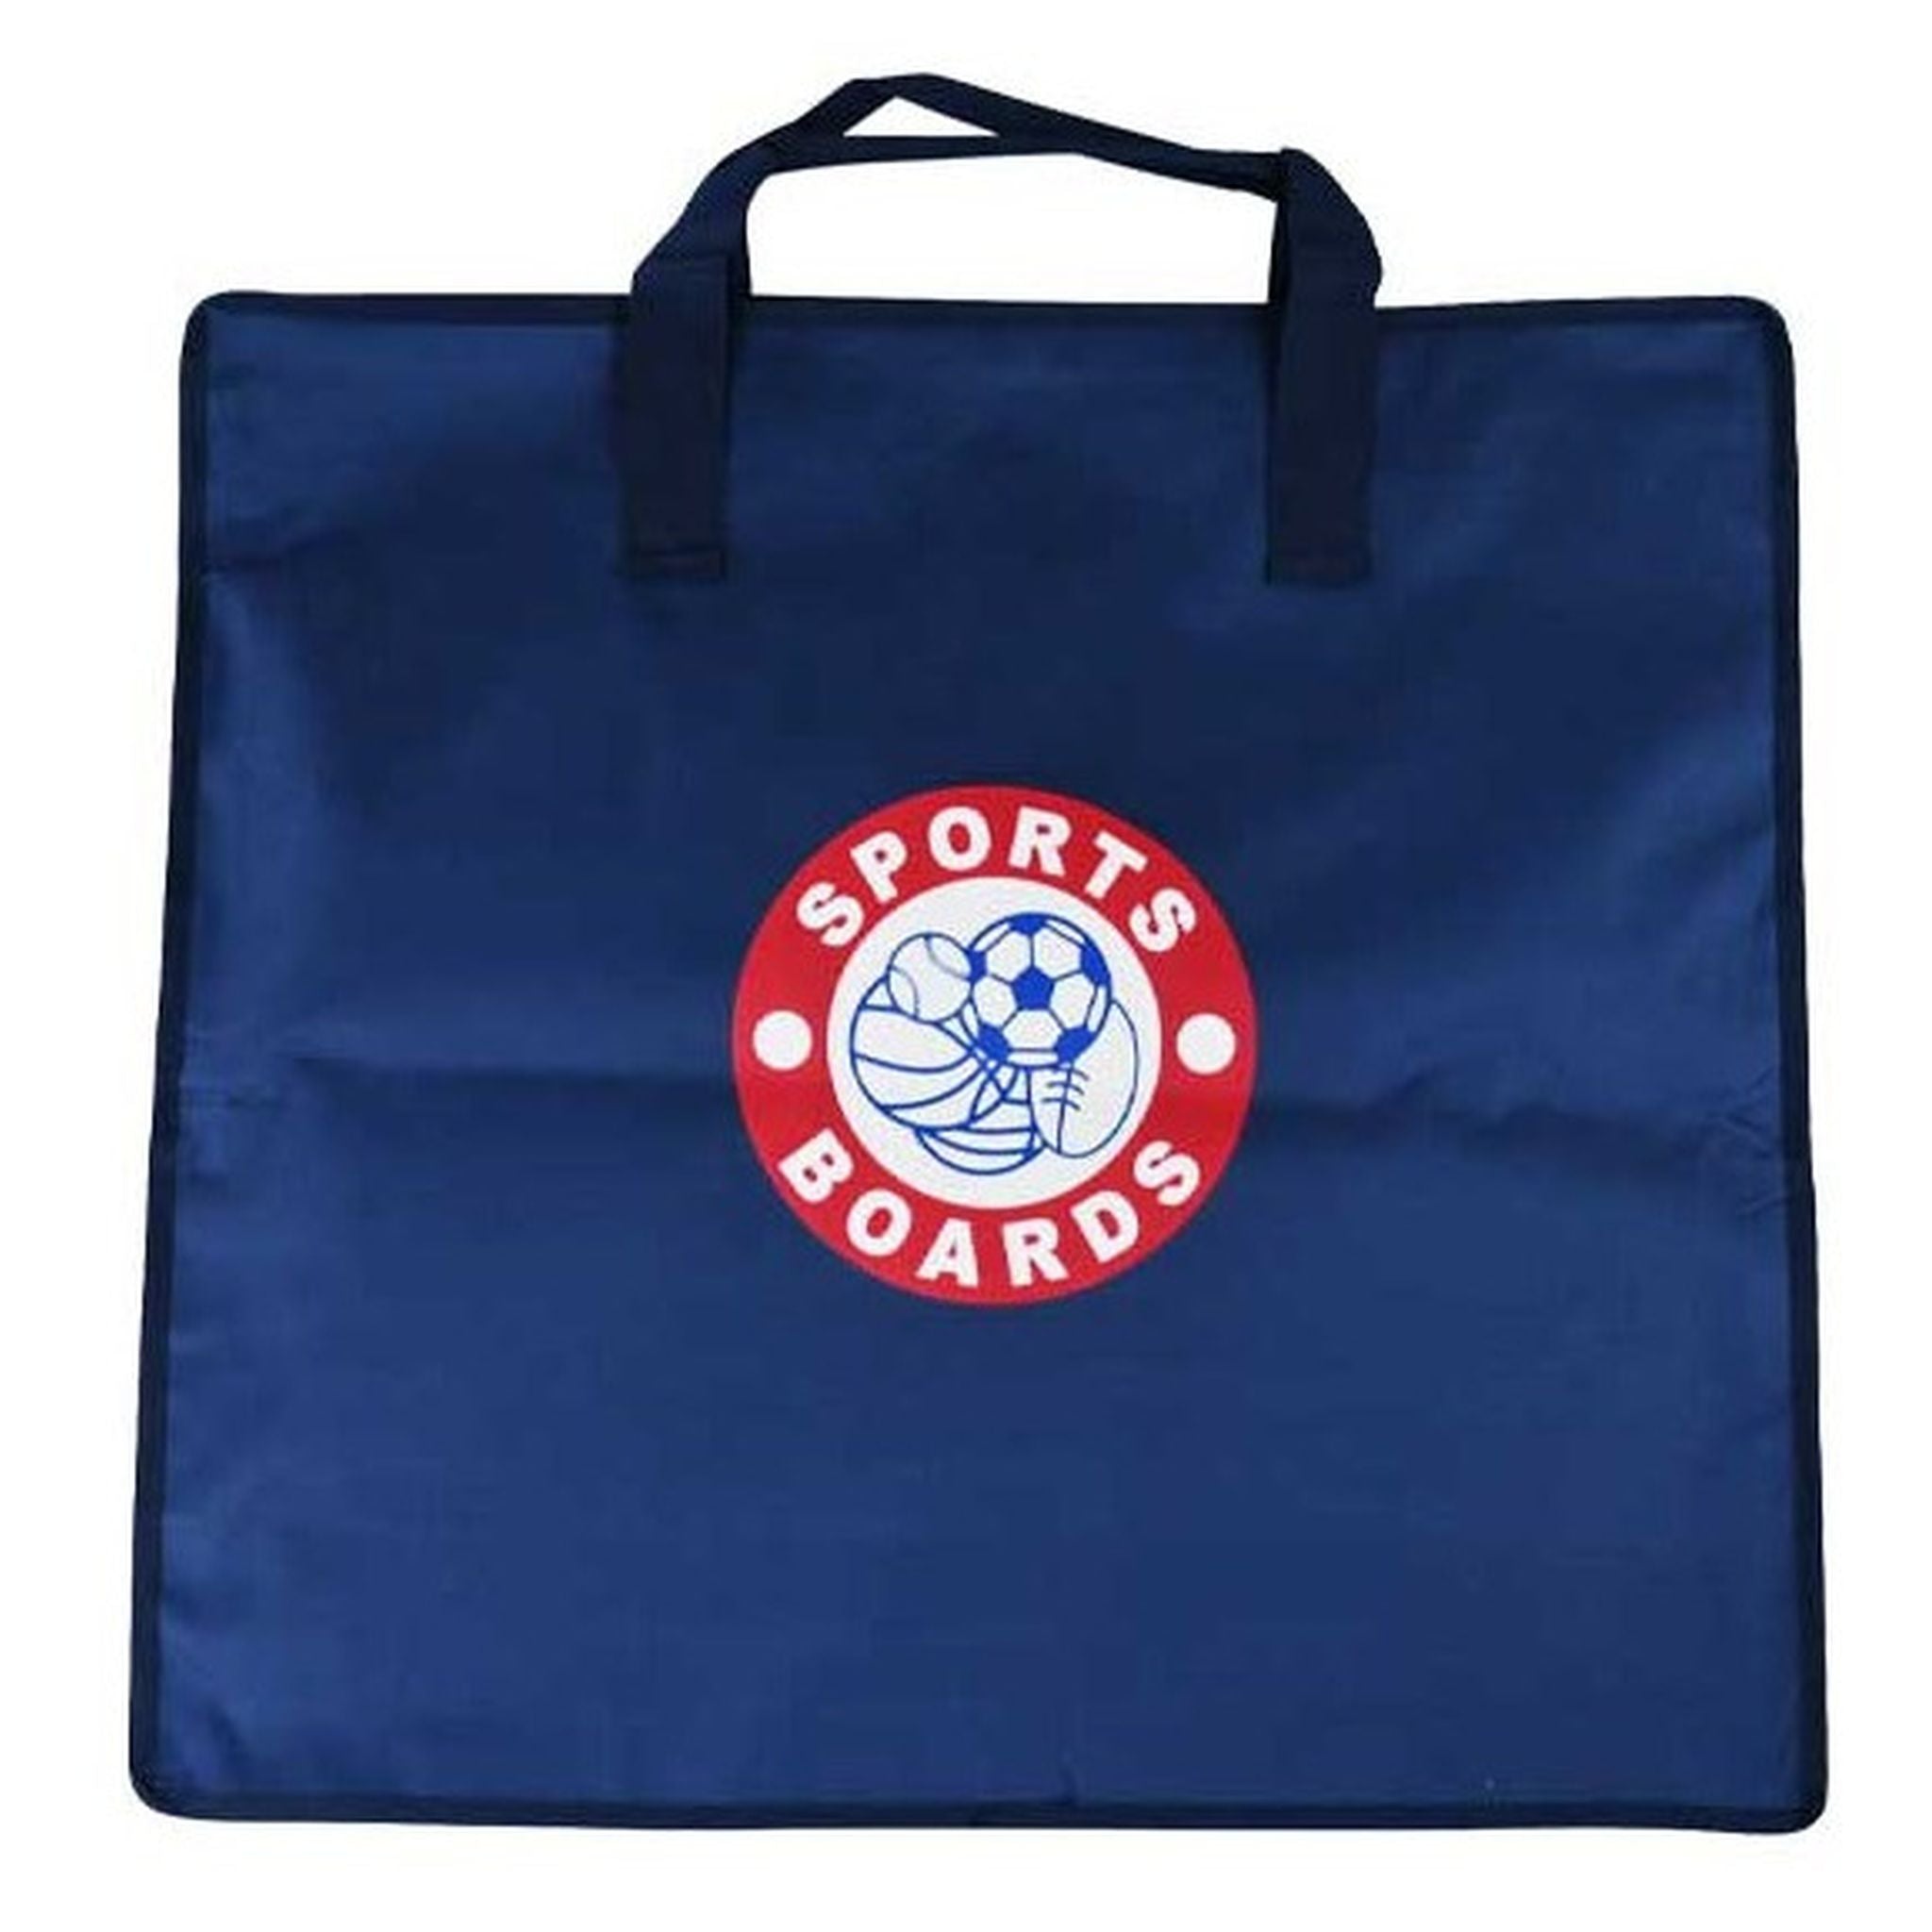 Sports Boards Coaches Medium Carry Bag